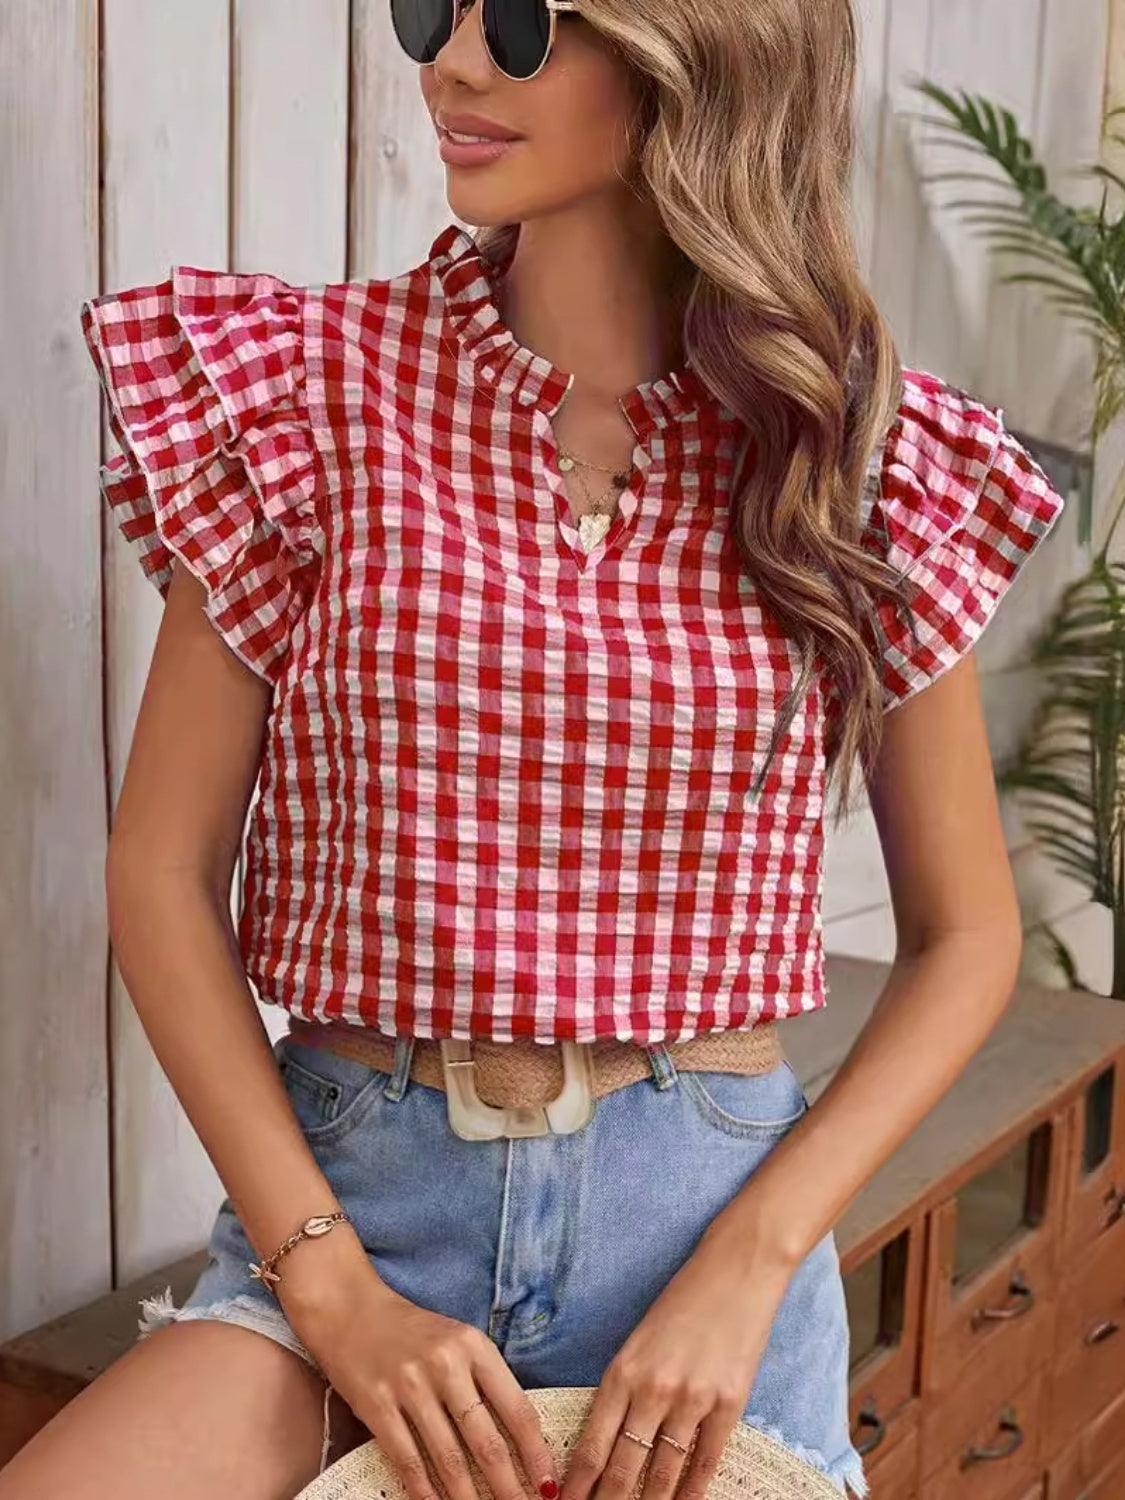 a woman wearing a red and white checkered top